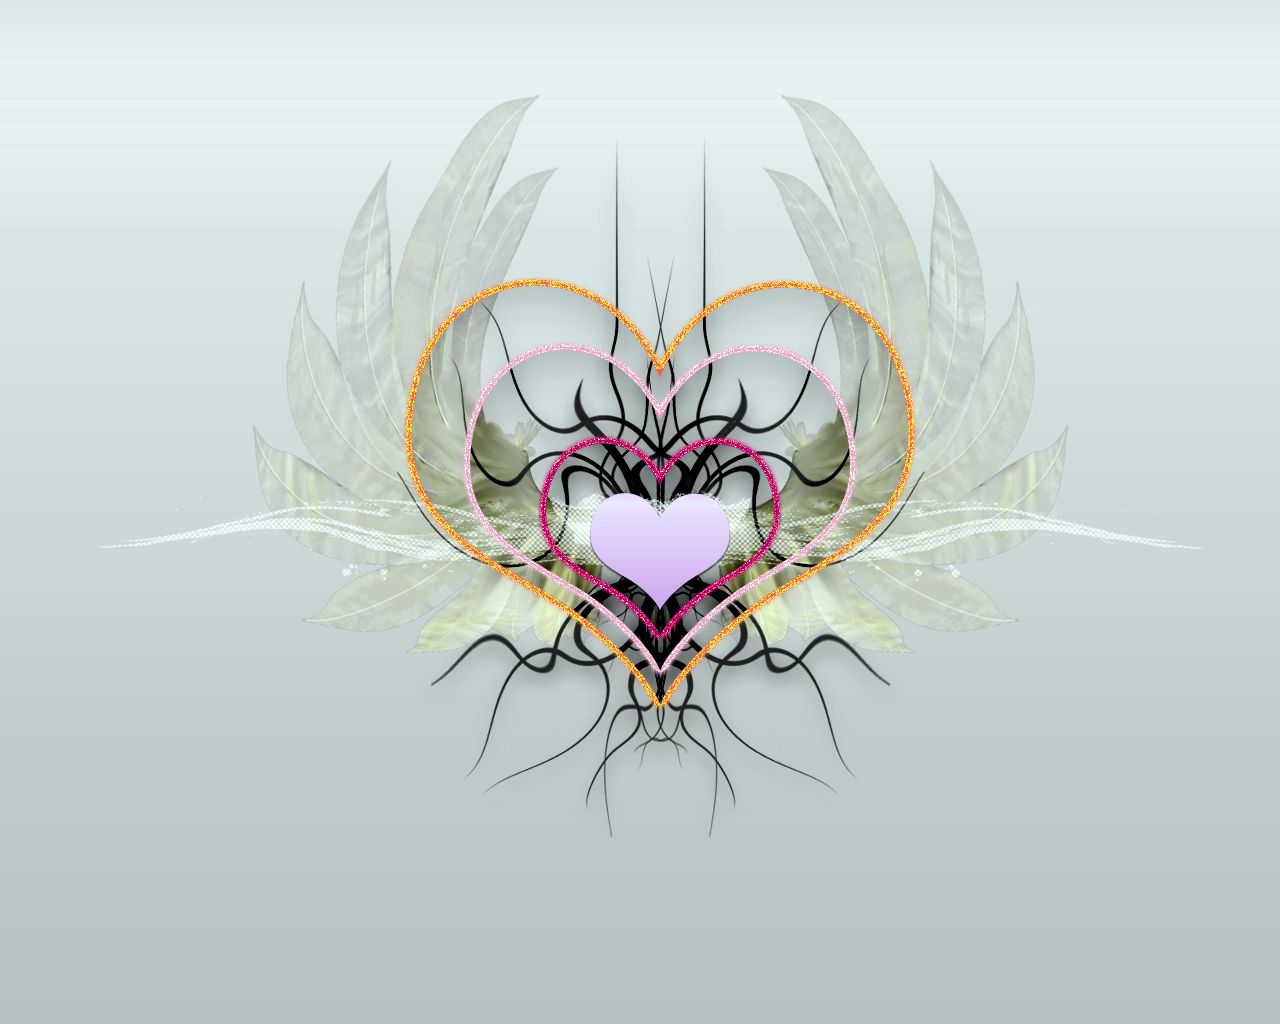 Mobile wallpaper: Wings, Picture, Heart, Drawing, Love, 85227 download the  picture for free.